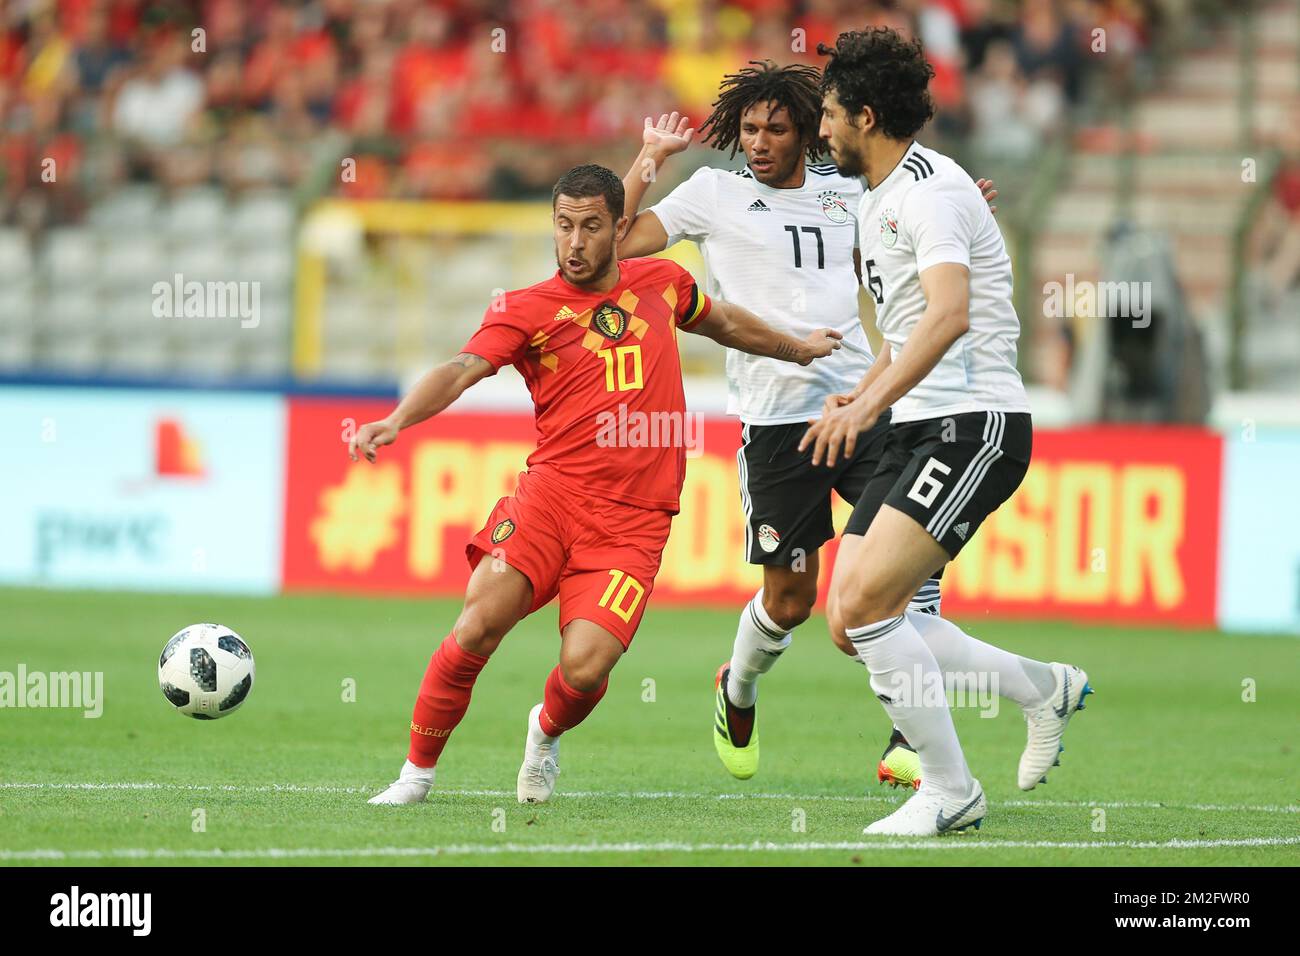 Belgium's Eden Hazard, Egypt's Kahraba and Egypt's Ahmed Hegazi fight for the ball during a friendly game between Belgium national team, The Red Devils and Egyptian national soccer team, Wednesday 06 June 2018, in Brussels. Both teams prepare the upcoming FIFA World Cup 2018 in Russia. BELGA PHOTO BRUNO FAHY  Stock Photo